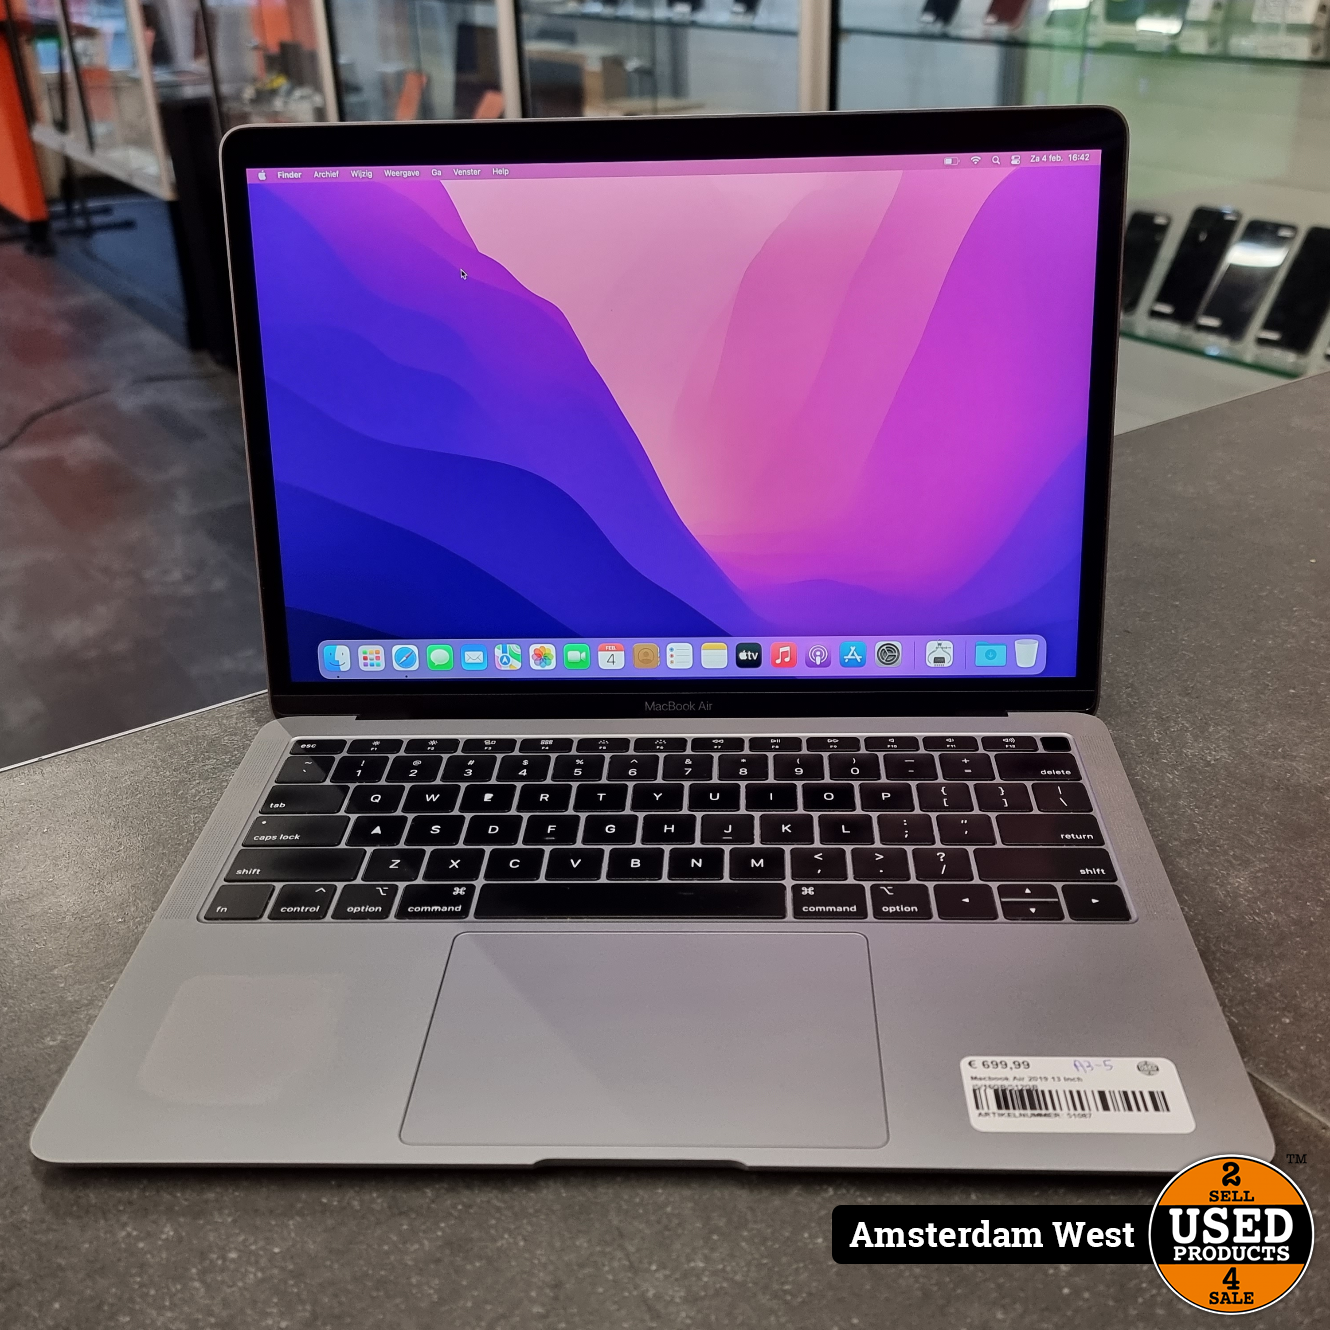 Macbook Air 2019 13 Inch i5/16GB/512GB | Nette staat - Used Products West